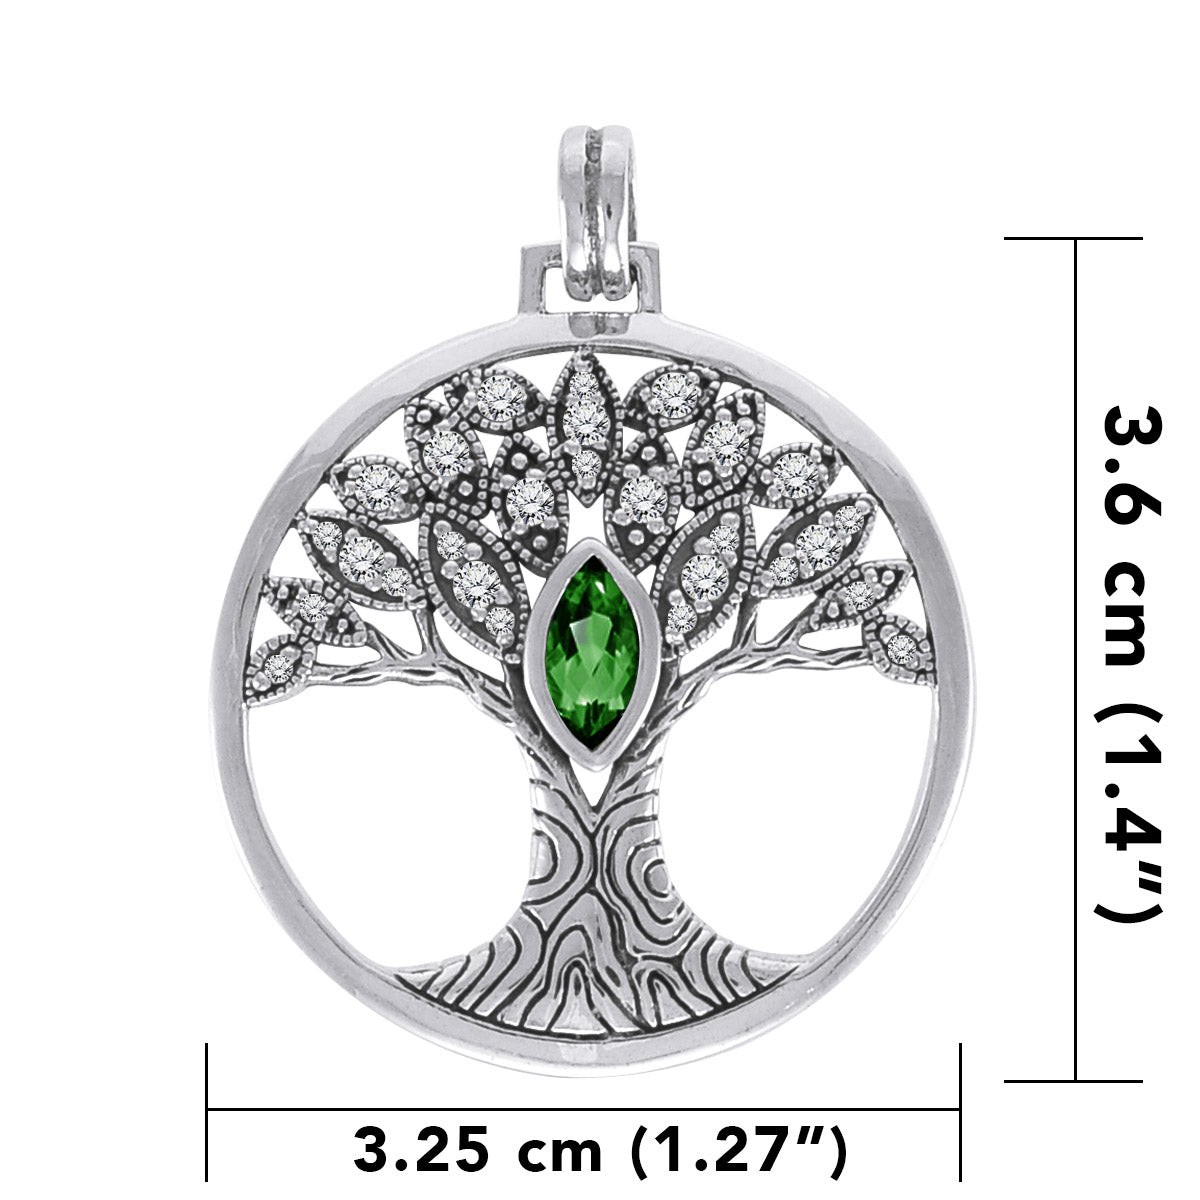 Wondrous Living through the Tree of Life ~ Sterling Silver Jewelry Pendant TPD3873